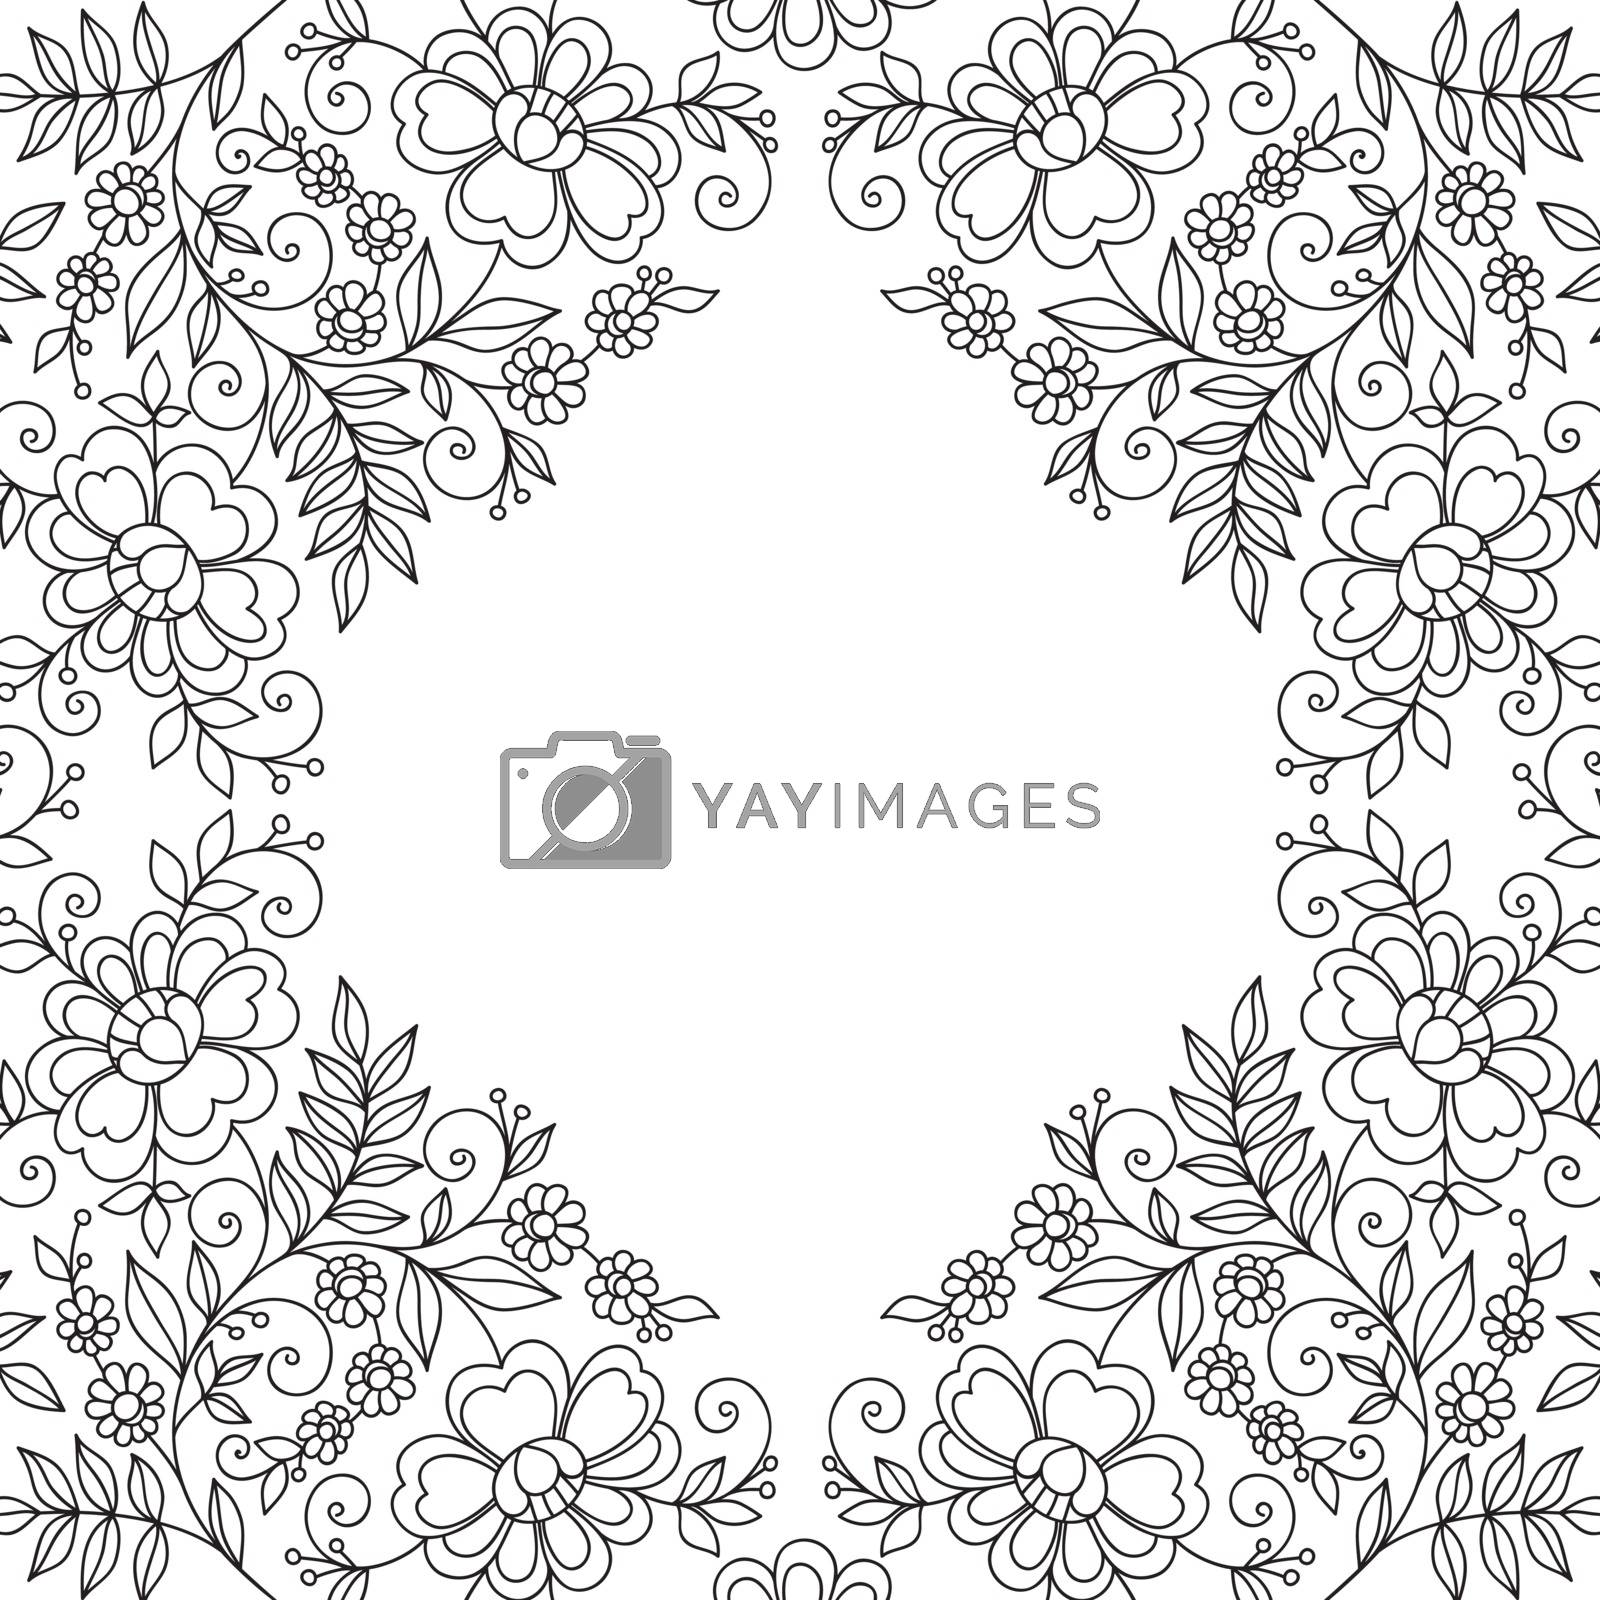 Royalty free image of Flower design lace frame by iktash